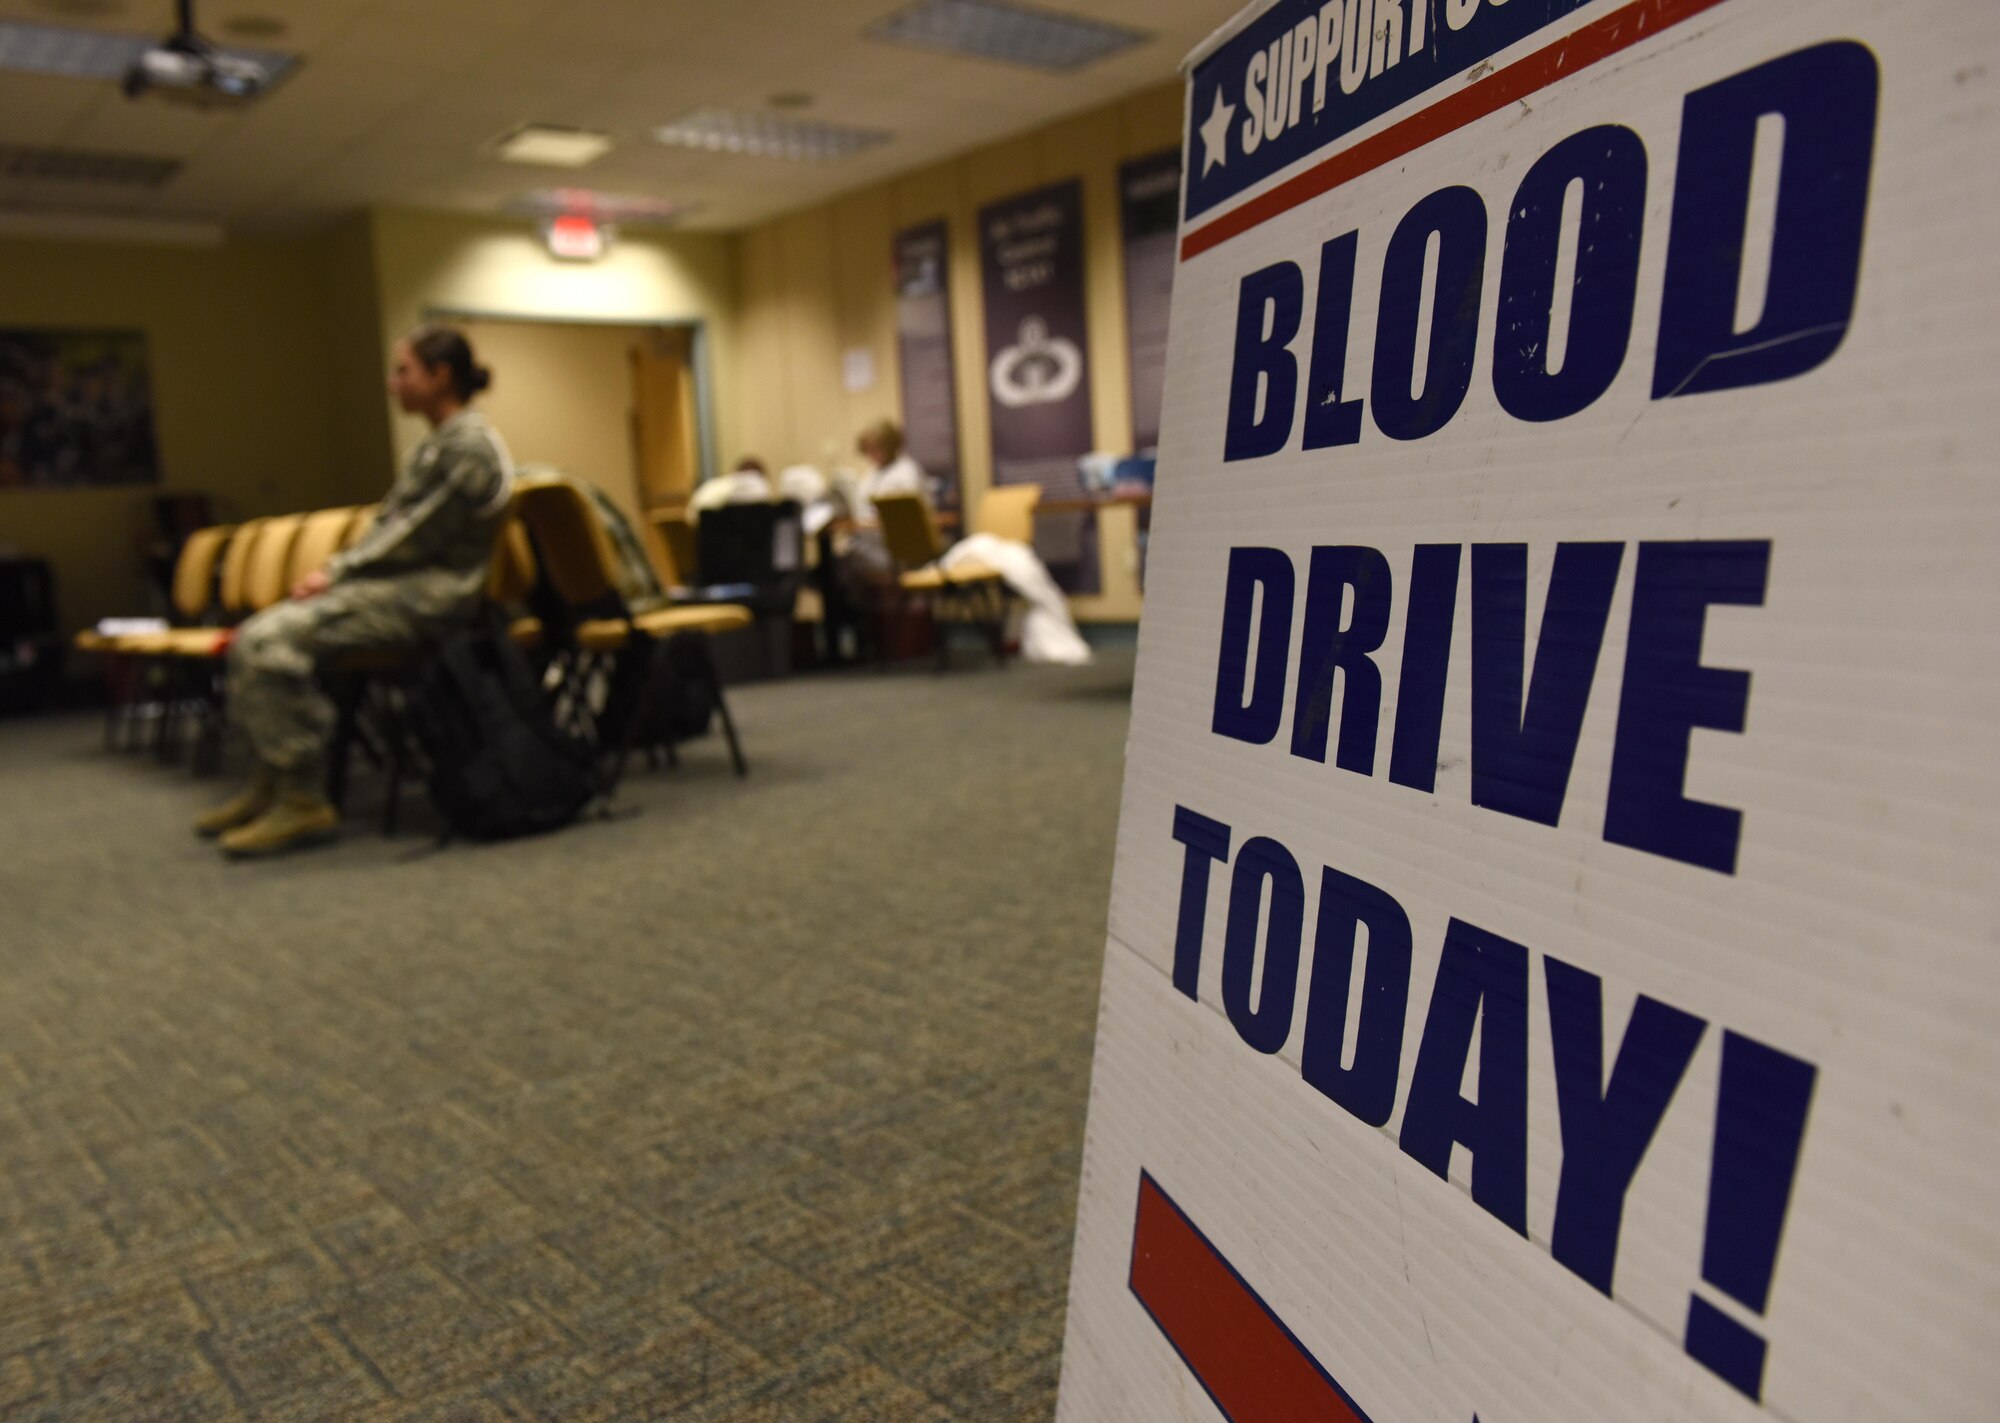 A Keesler Blood Donor Center sign sits on display during a blood drive at Cody Hall Nov. 21, 2016, on Keesler Air Force Base, Miss. The Keesler Blood Donor Center is one of three Air Force blood donor centers and supports the Armed Services Blood Program by collecting blood for the Defense Department for use in deployed locations and military treatment facilities. (U.S. Air Force photo by Senior Airman Holly Mansfield)  